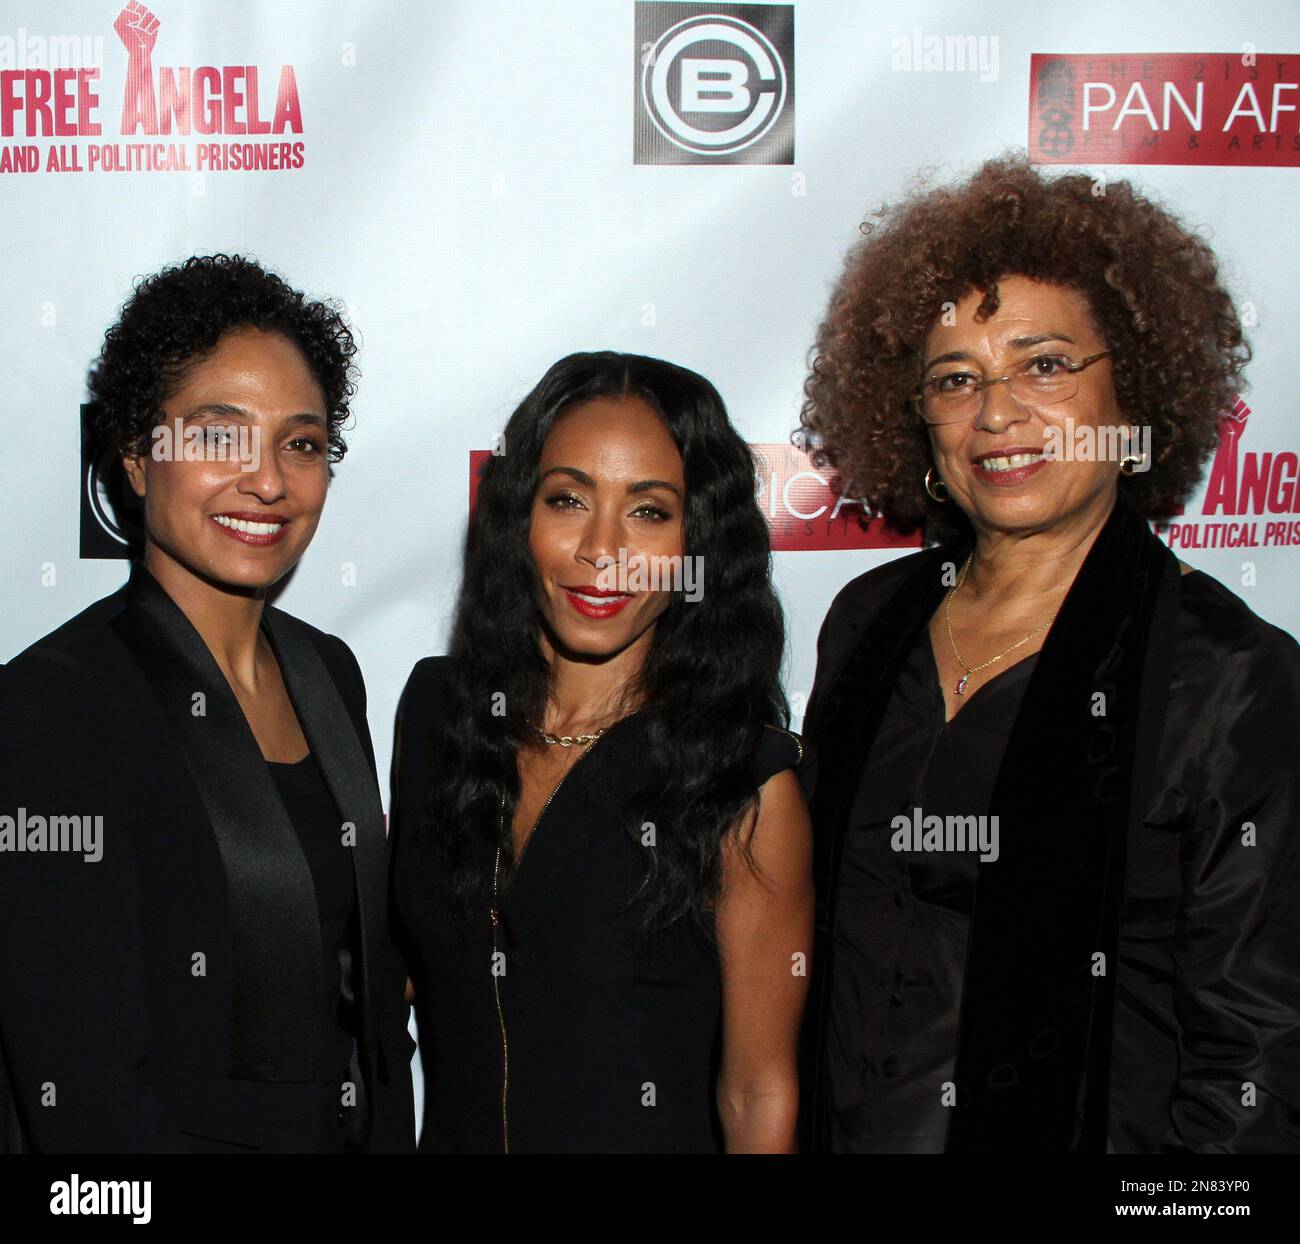 L-R) Shola Lynch, Jada Pinkett Smith and Angela Davis attend Los Angeles Premiere of ???Free Angela and All Political Prisoners??? at Pan African Film Festival on Sunday,